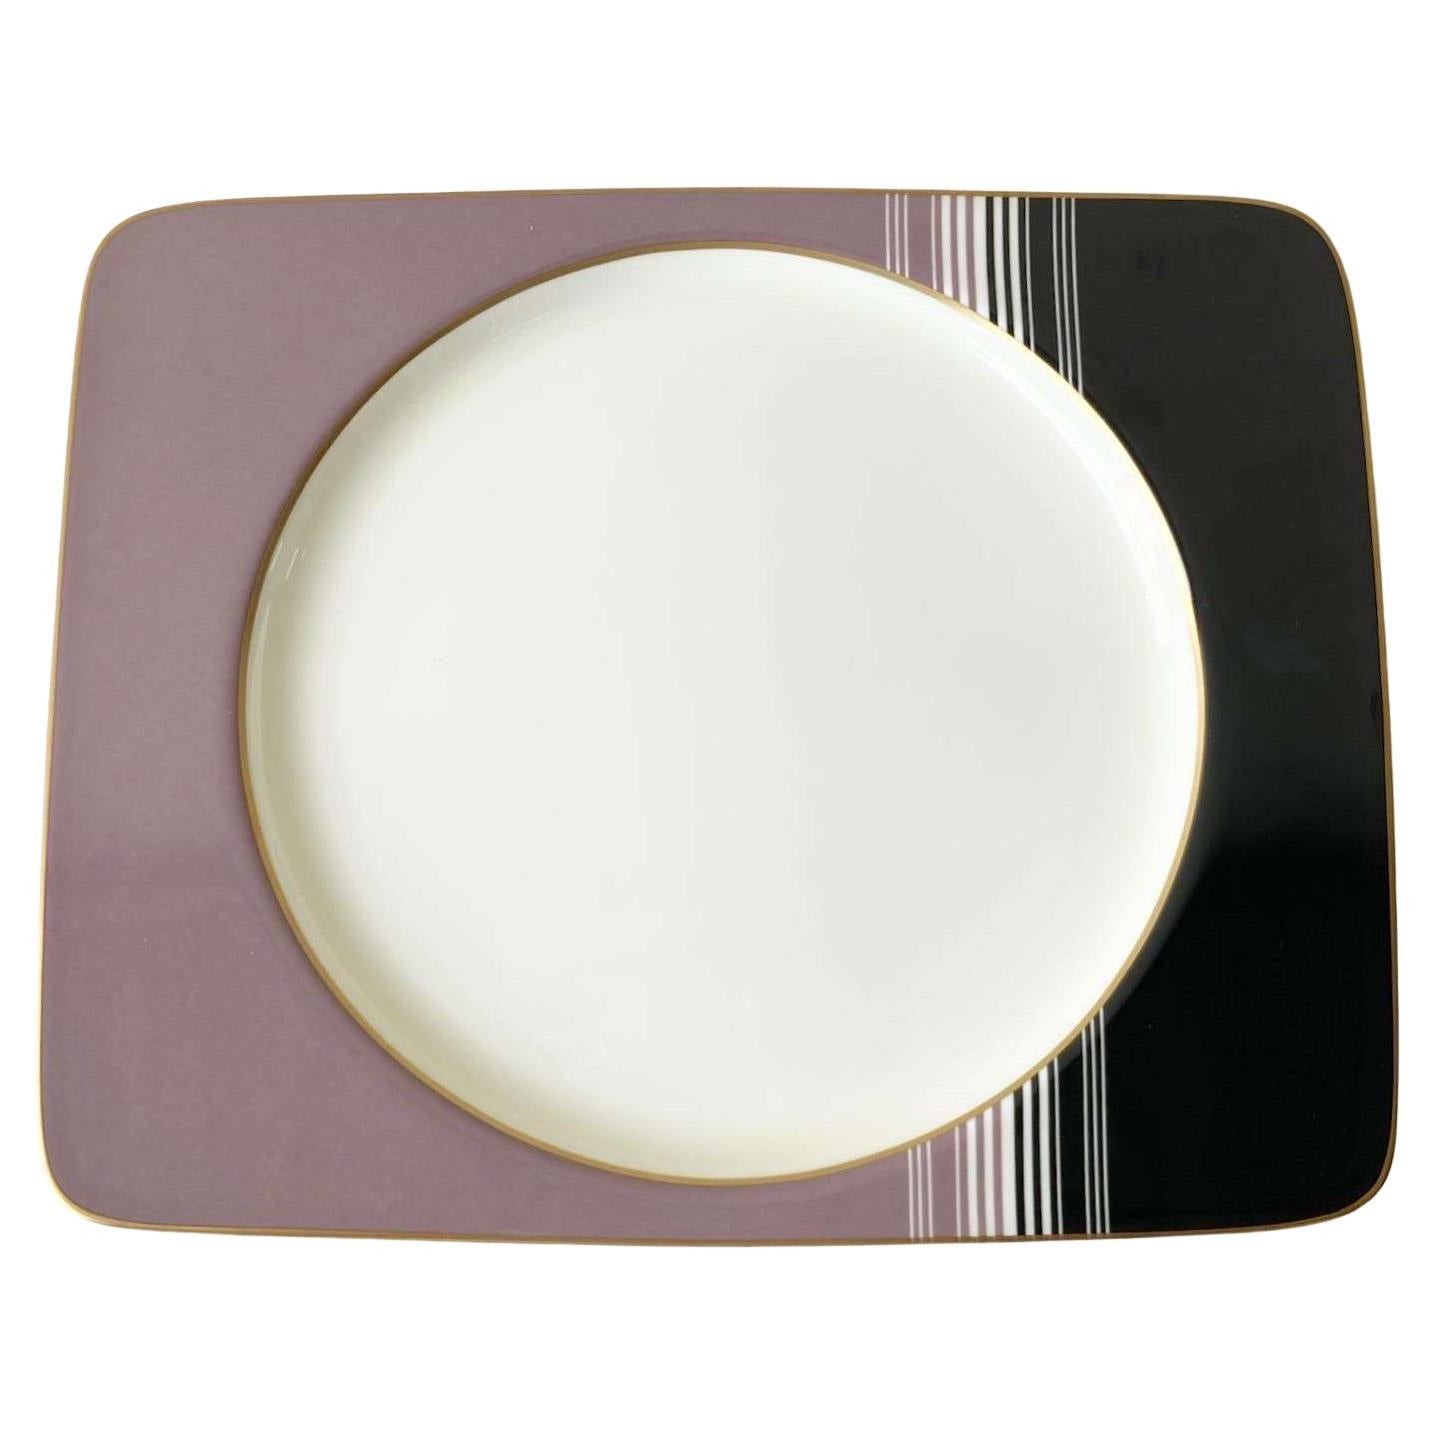 Postmodern Purple White and Black Serving Platter by Daniel Hechter For Sale